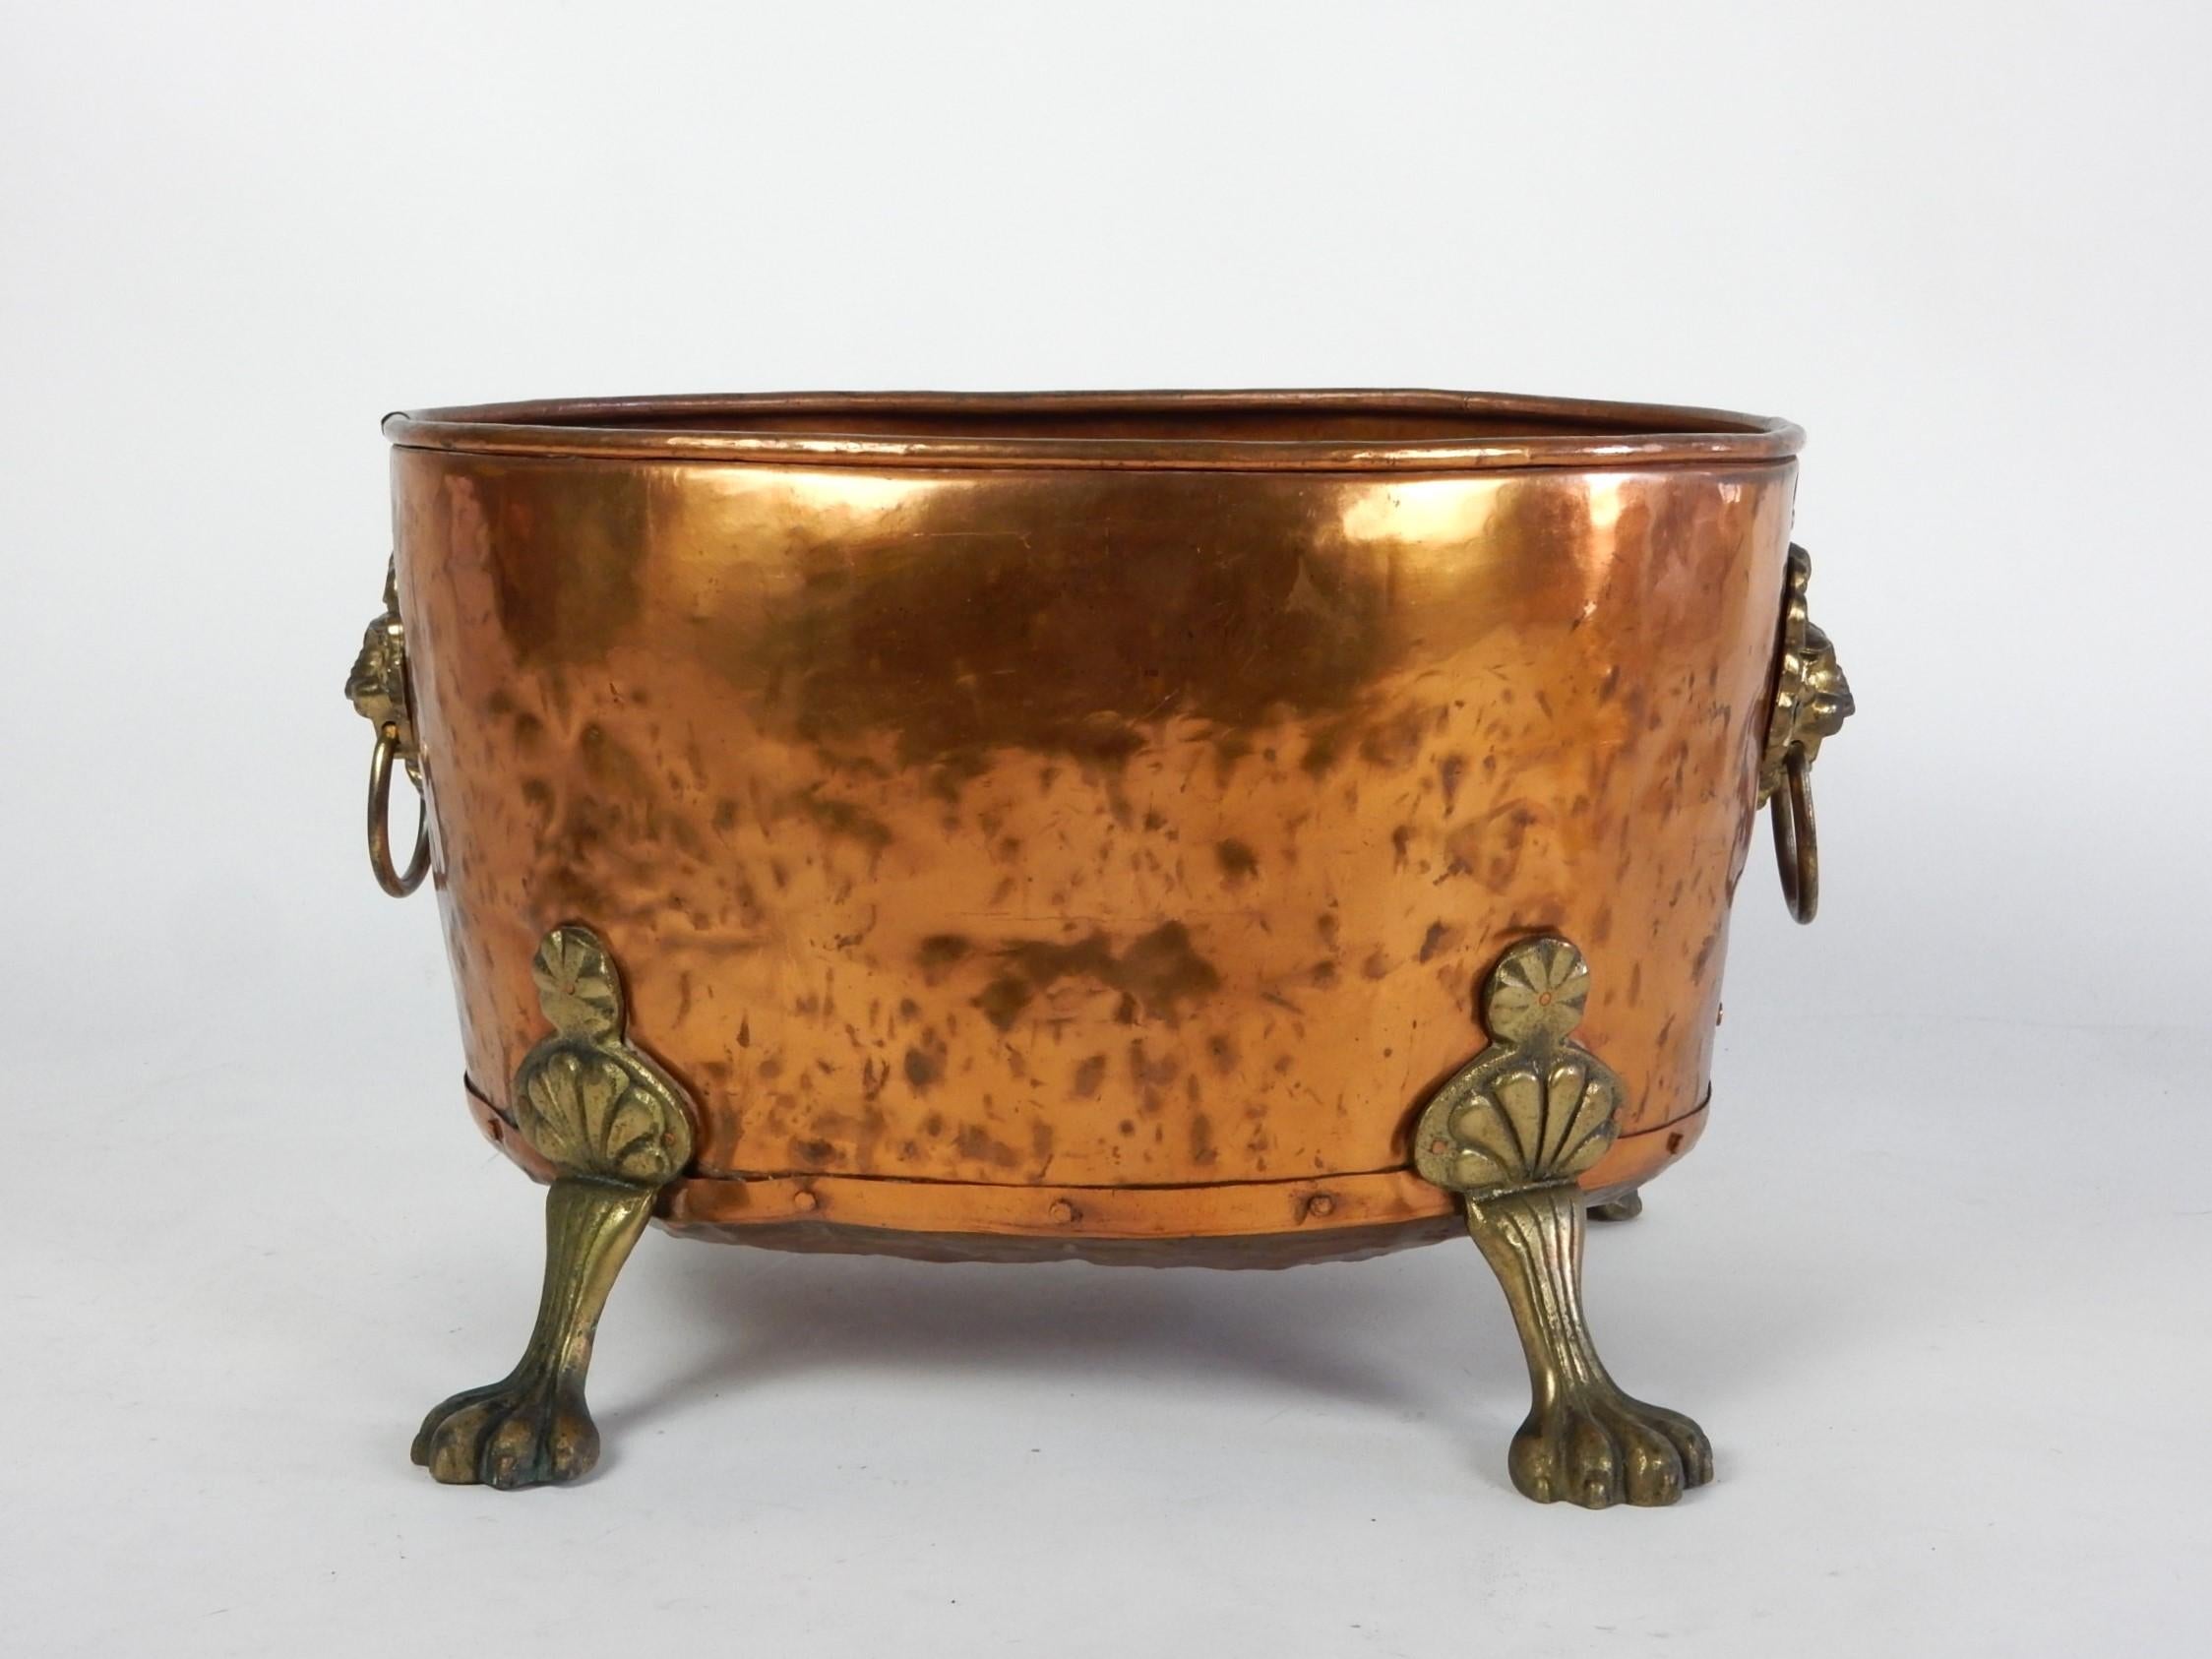 19th Century English Hammered Copper & Brass Claw Footed Lion Log Bin Planter For Sale 1